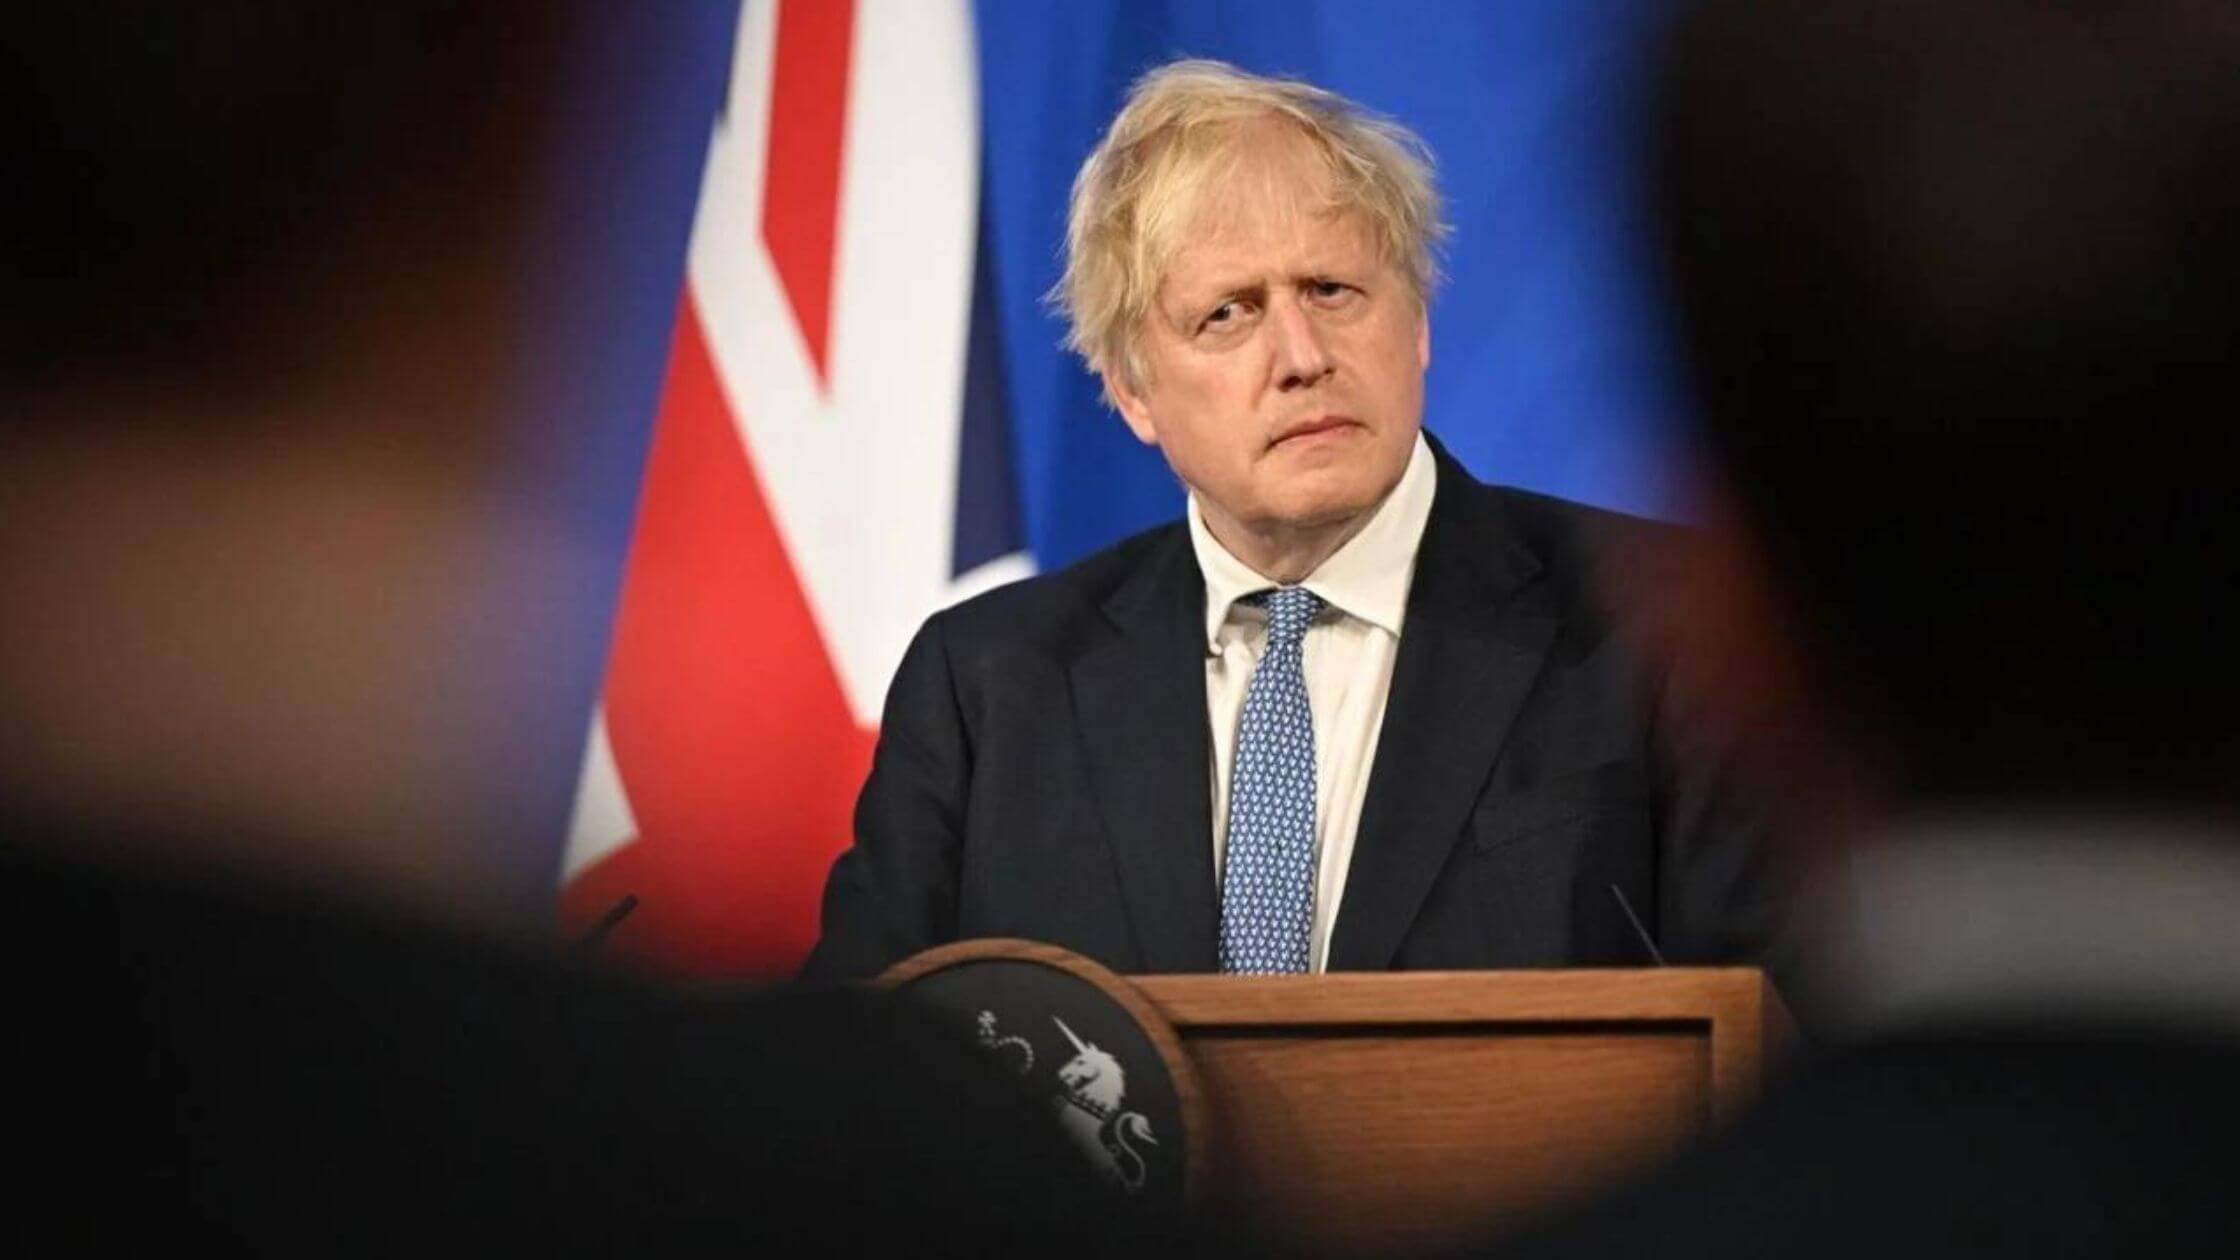 Boris Johnson: UK Prime Minister Resigns After Mutiny In His Party